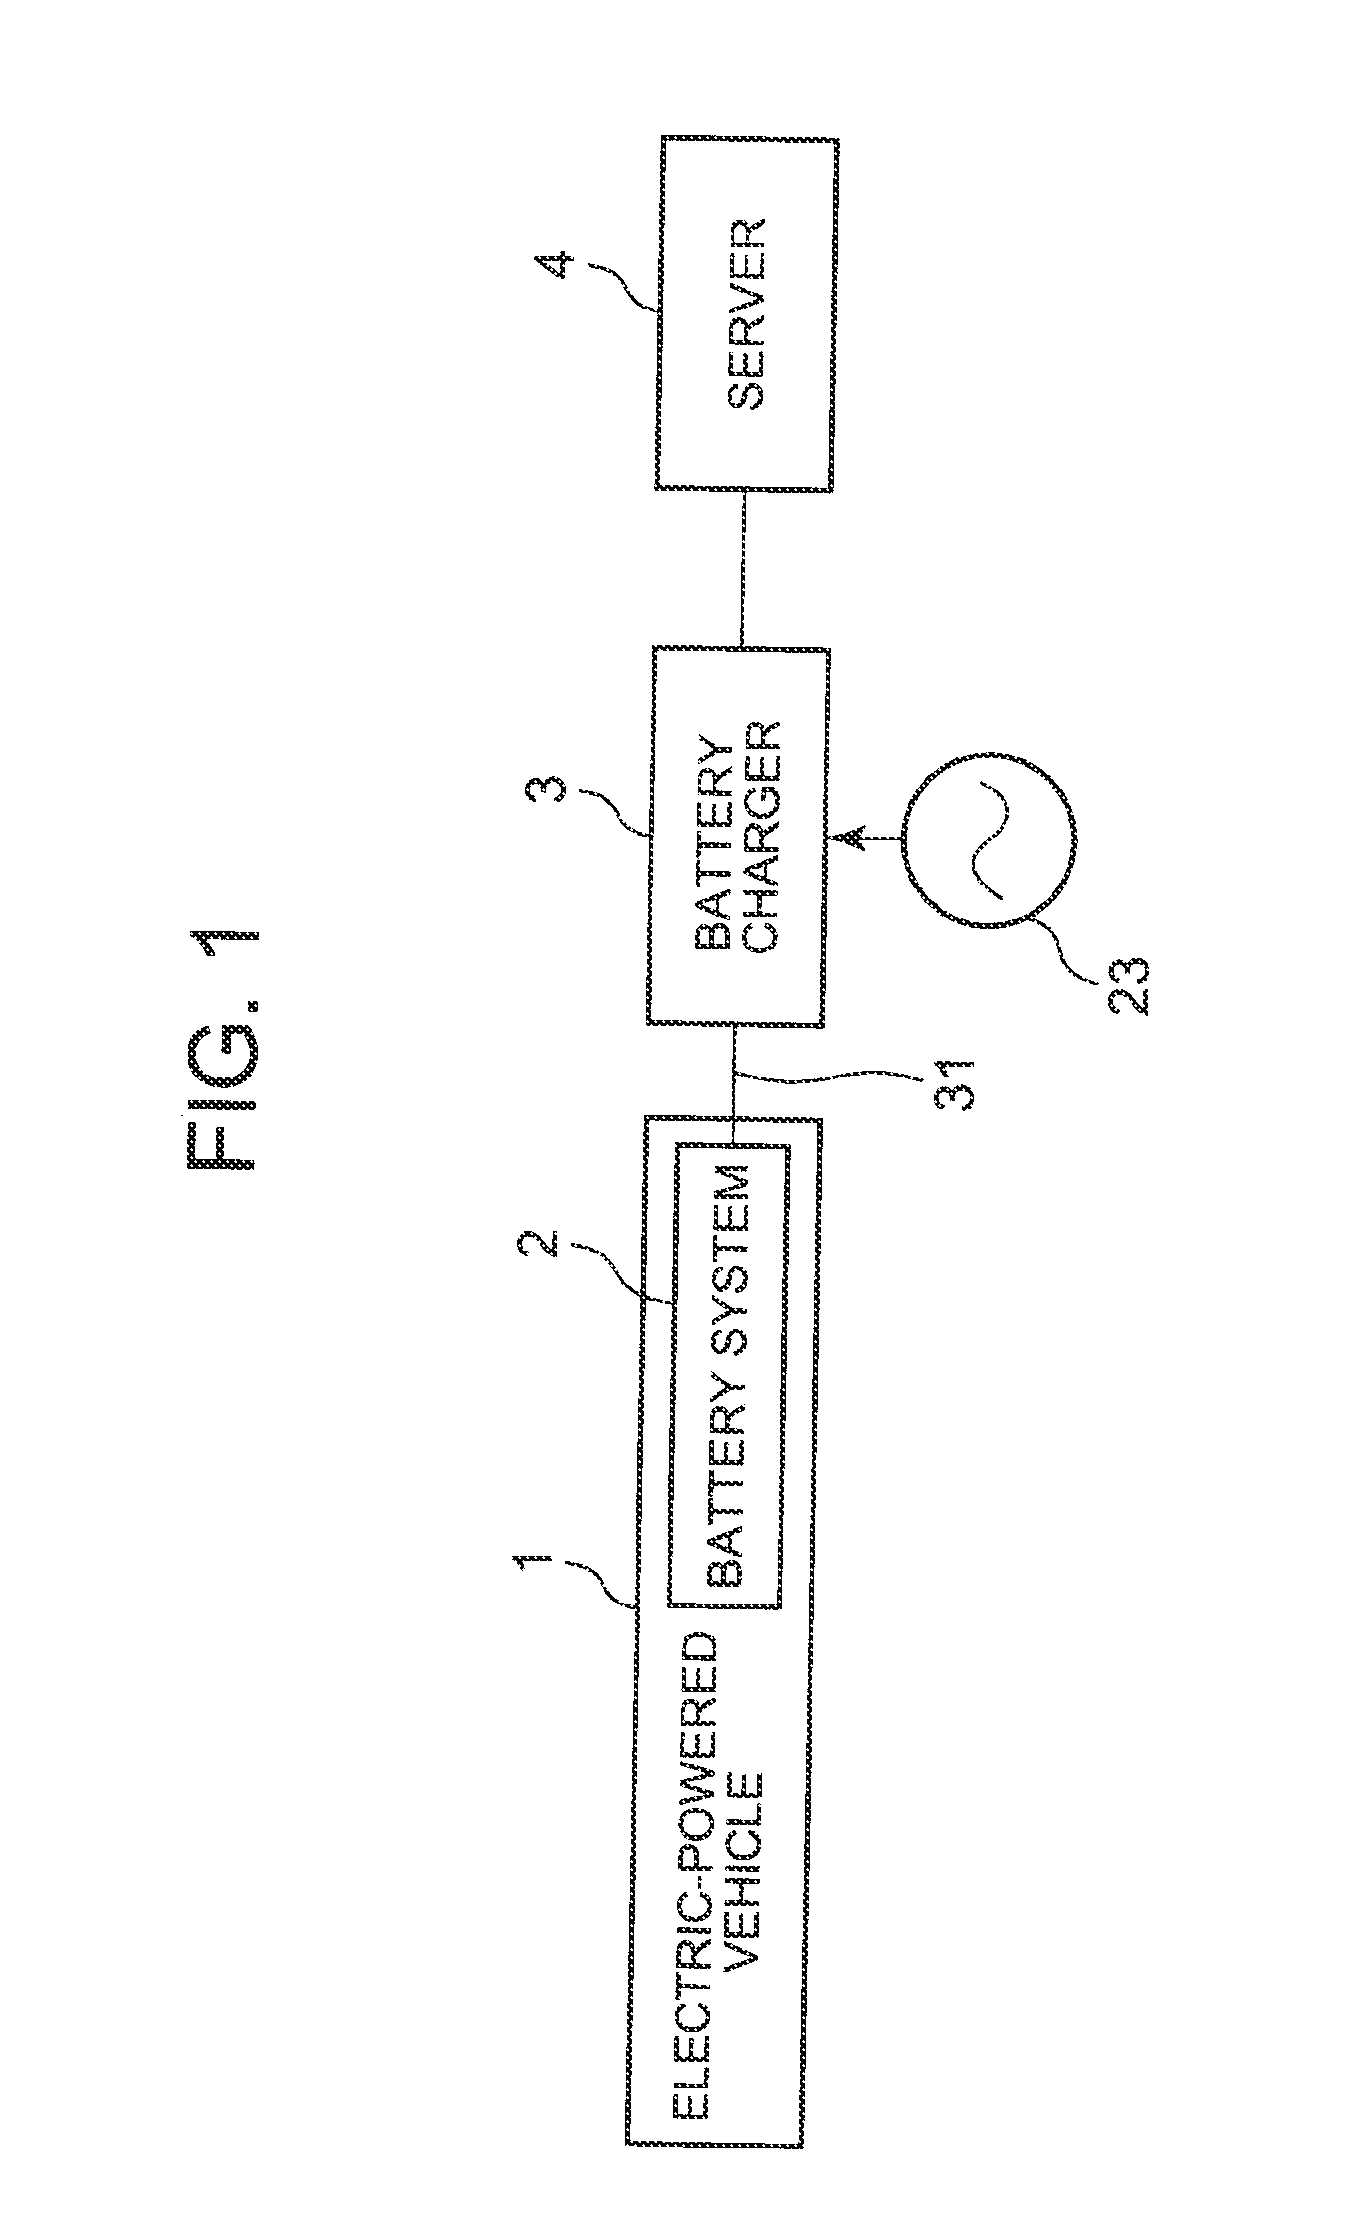 Secondary battery state management system, battery charger, secondary battery state management method, and electrical characteristics measurement method